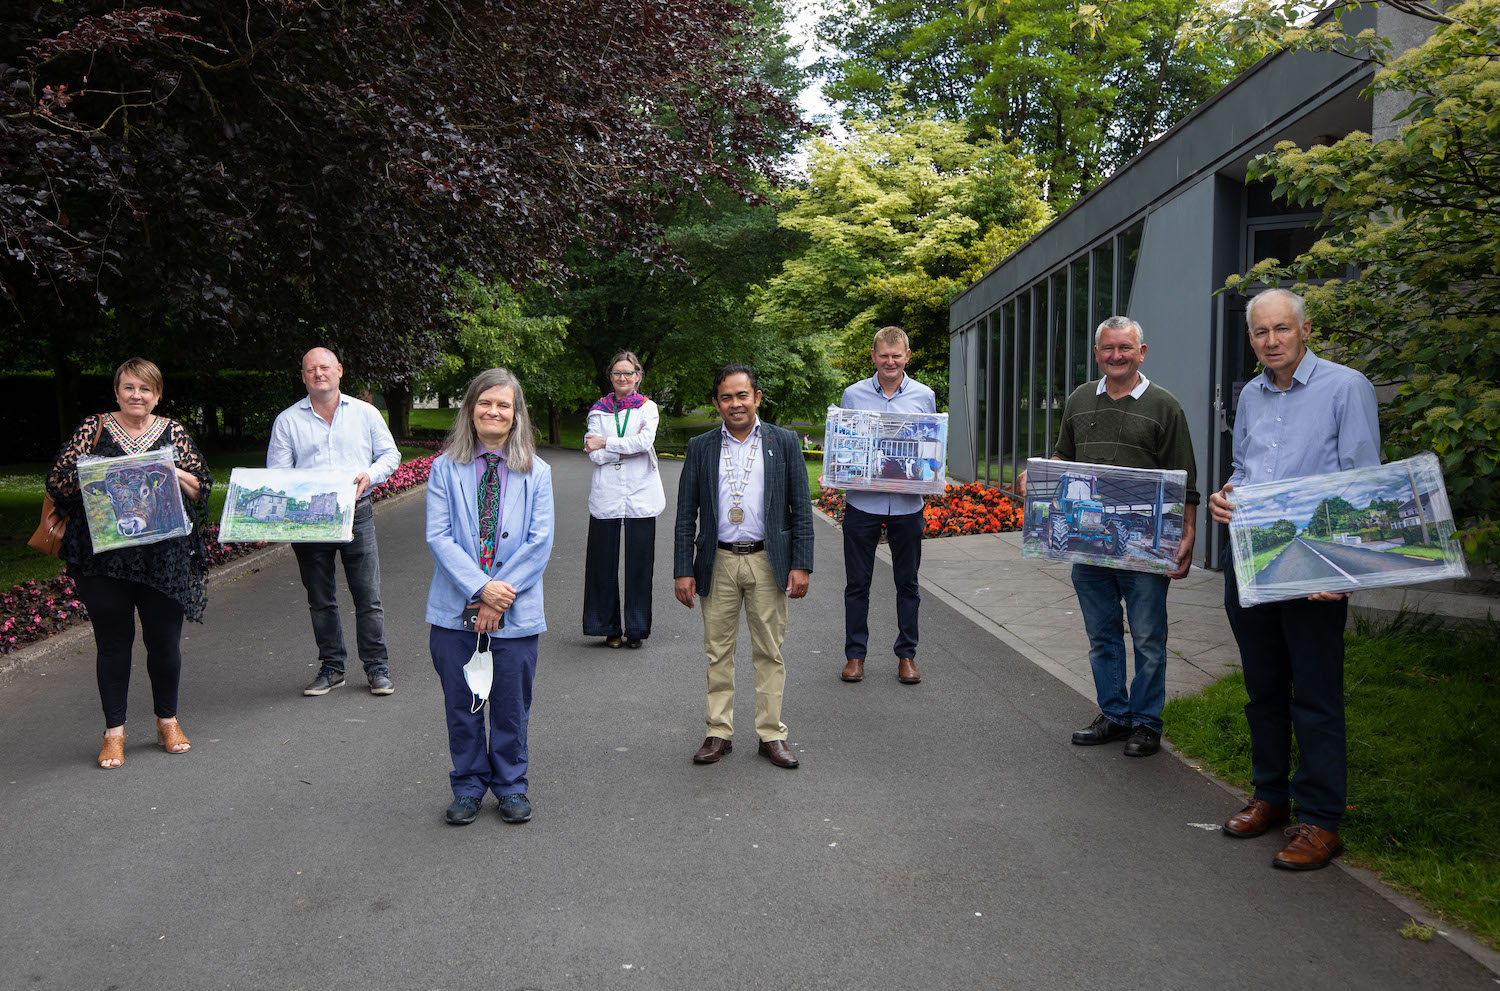 Home on the Farm exhibition - Pictured are June Danagher, David Ryan, Artist Mary Burke, Una mcCarhty, Curator/Director, Limerick City Gallery of Art, Cllr. Abul Kalam Azad Talukder, Deputy Mayor of the City and County of Limerick, John MacNamara, Morgan Murphy and Dan Browne. Picture: Alan Place